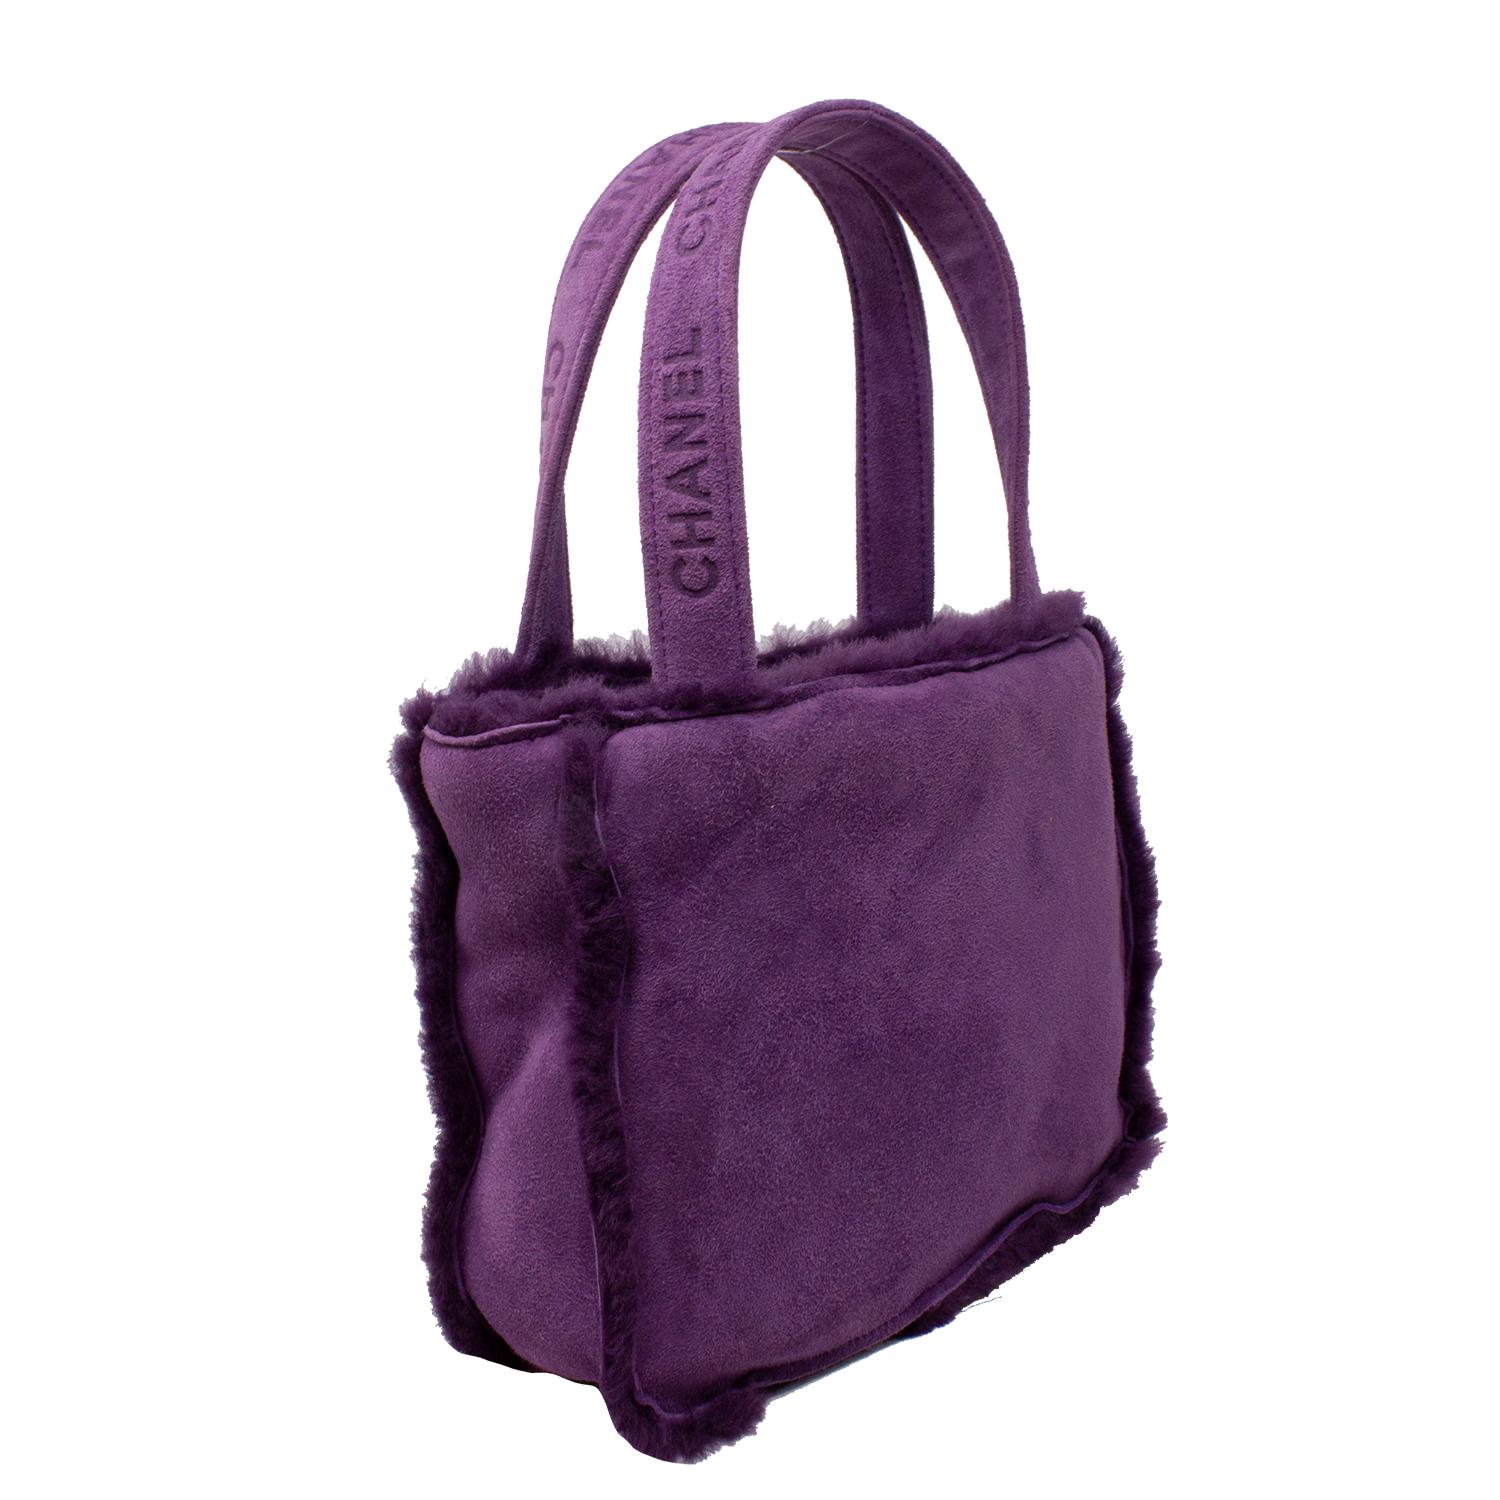 Very spirited mini Chanel tote crafted in soft purple shearling, with two logo printed Chanel handles, the open top opens up to a single zippered pocket and a slip pocket. We love how darling and cute this vintage piece is!

SPECIFICS
Length: